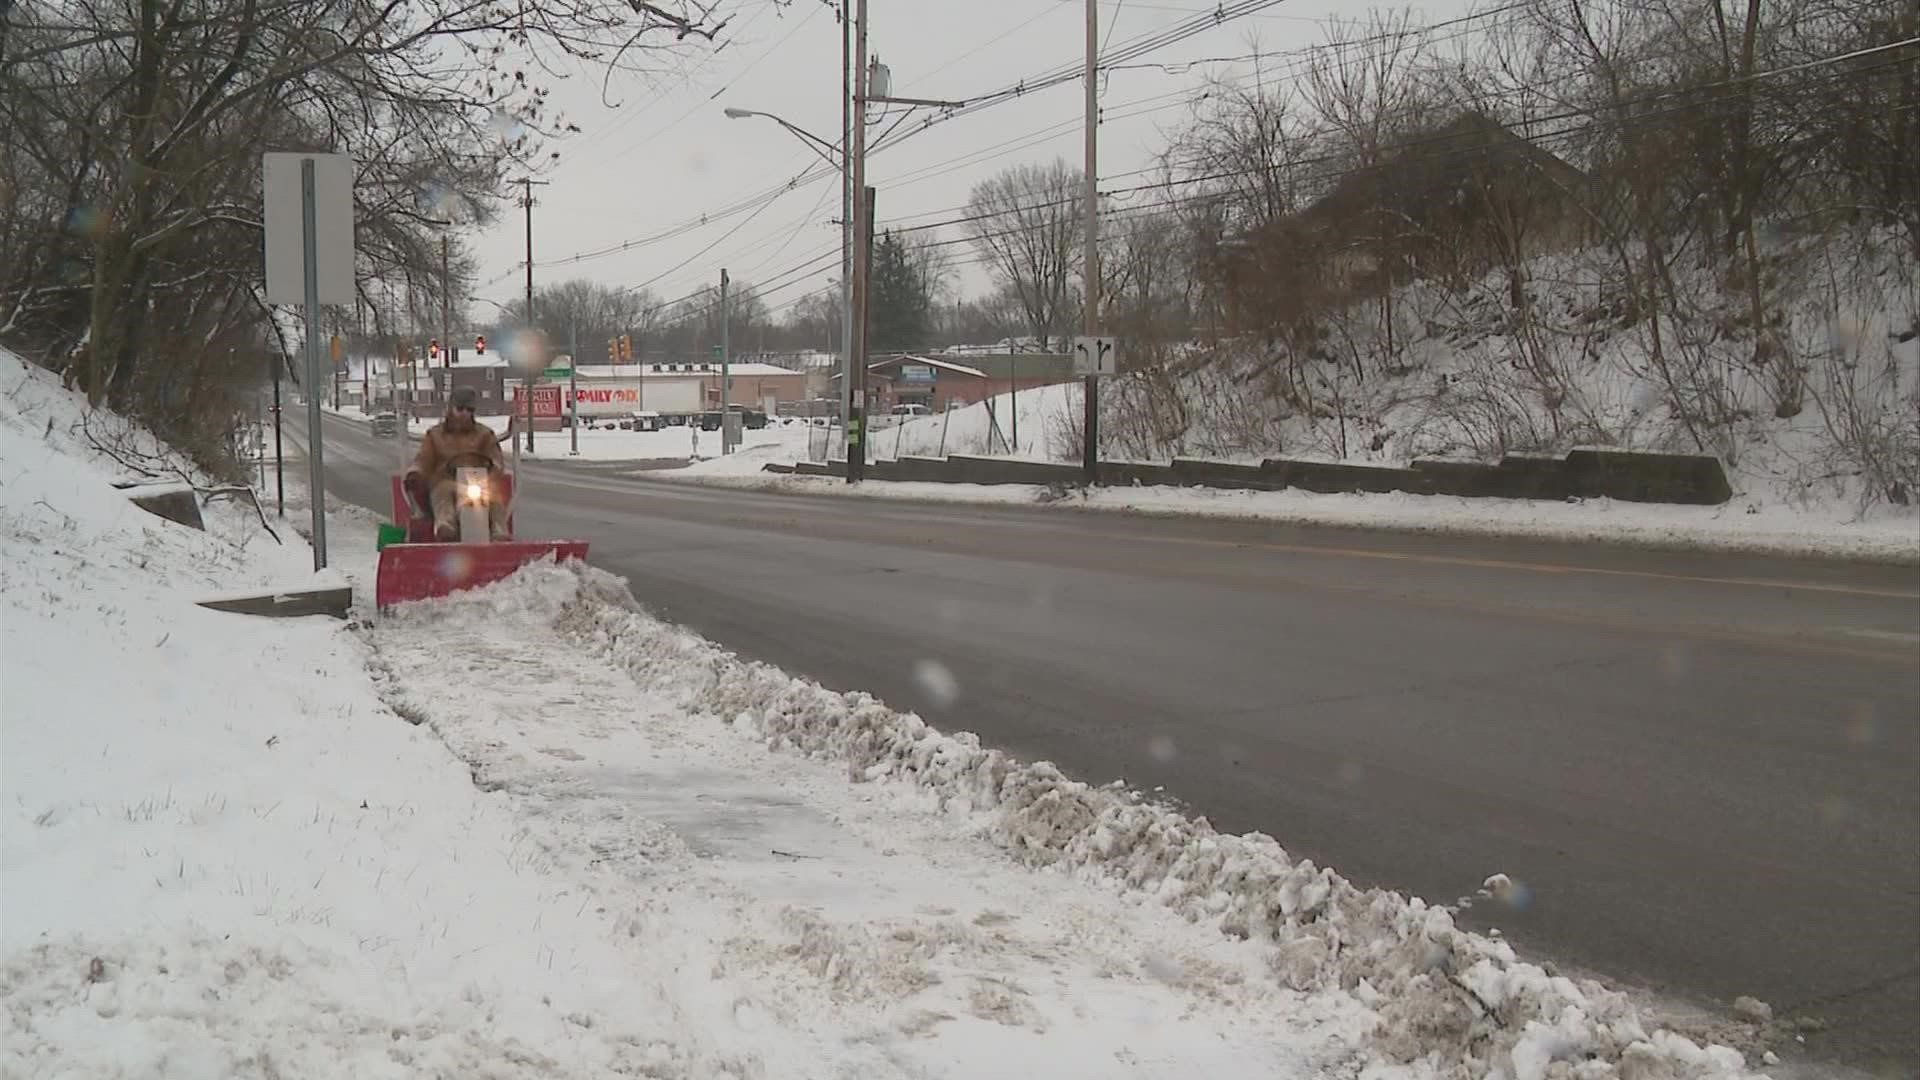 The City of Columbus said the winter storm impacted parts of the city differently.